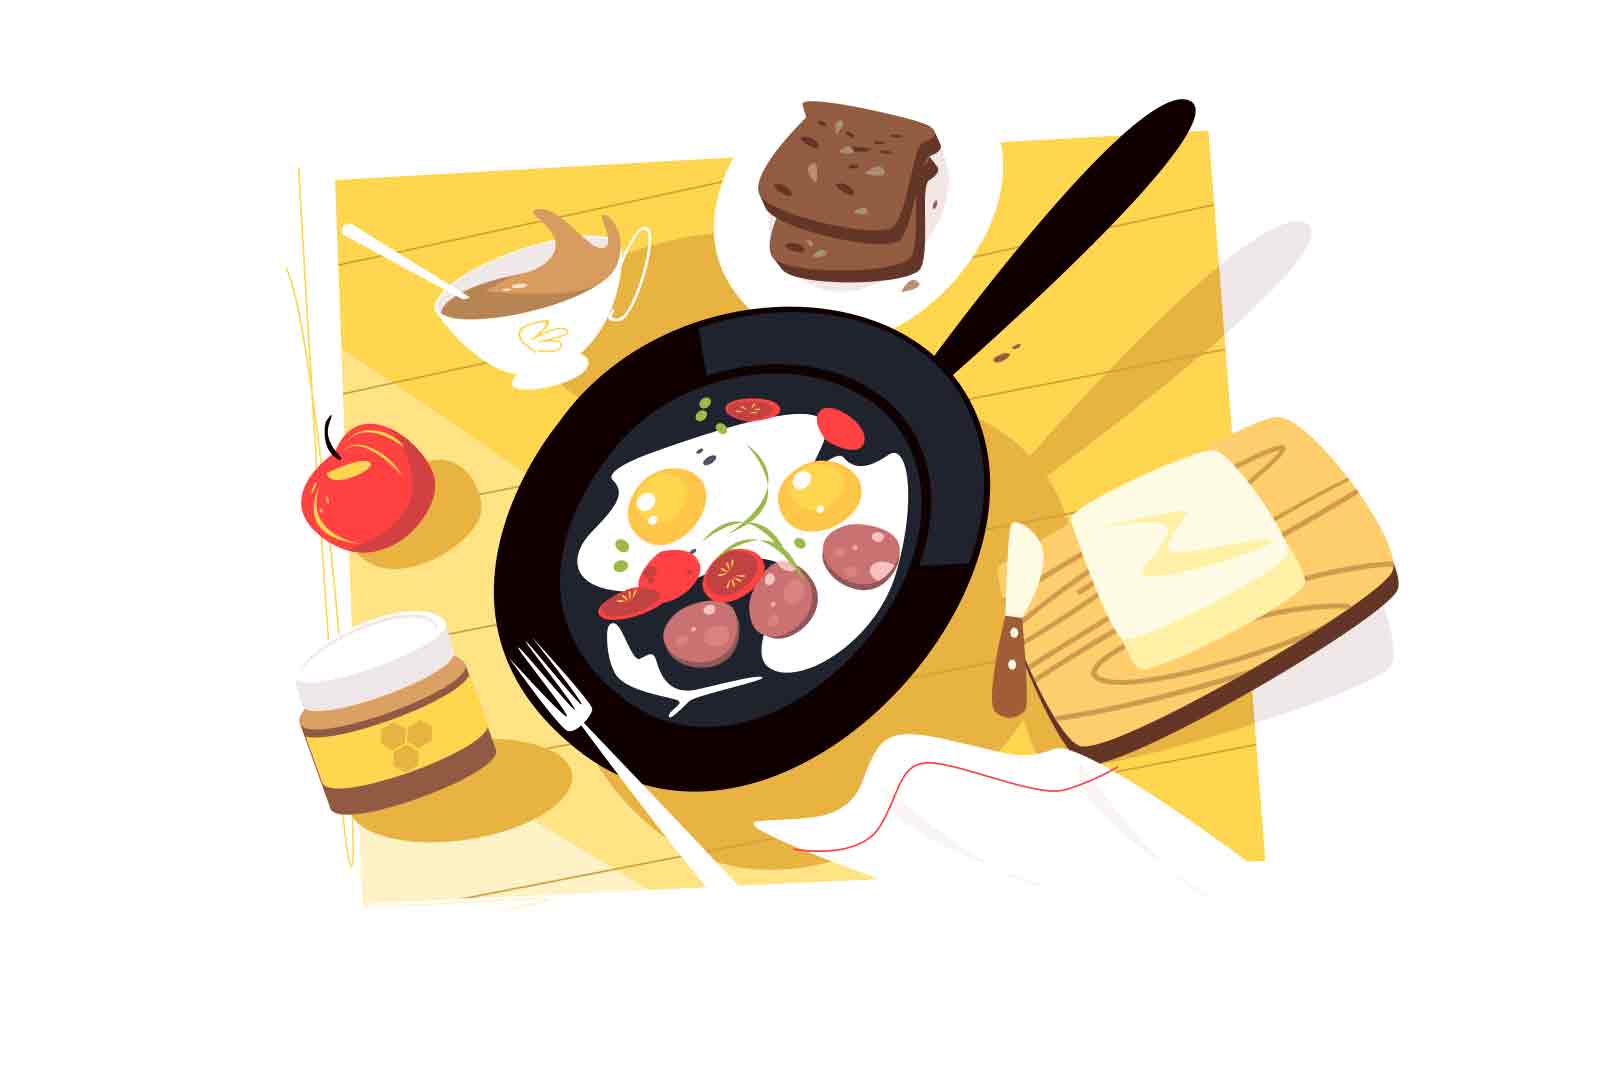 Delicious tasty and healthy breakfast, morning meal vector illustration. Fried eggs with sausages and tomatoes. Cup of coffee, bread and butter